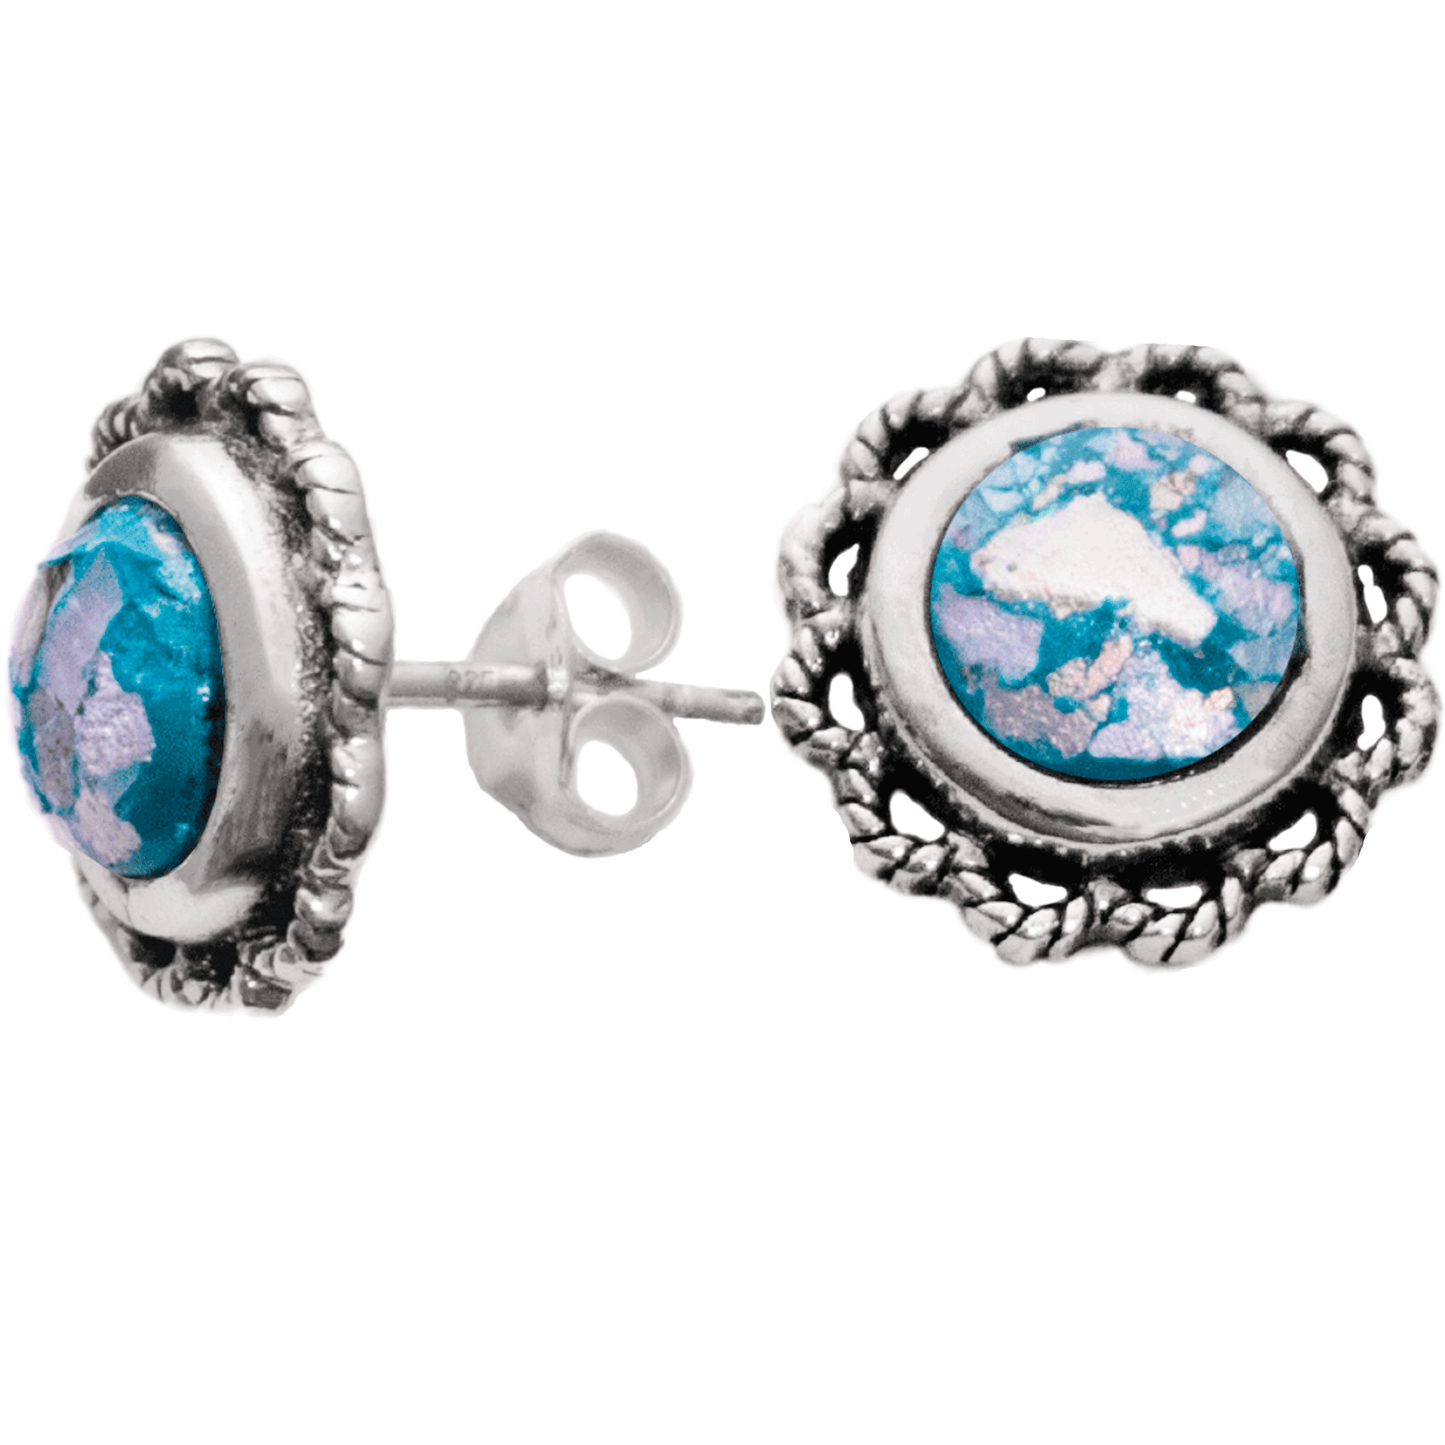 Circular-shaped stud earrings with multicolored roman glass in the center